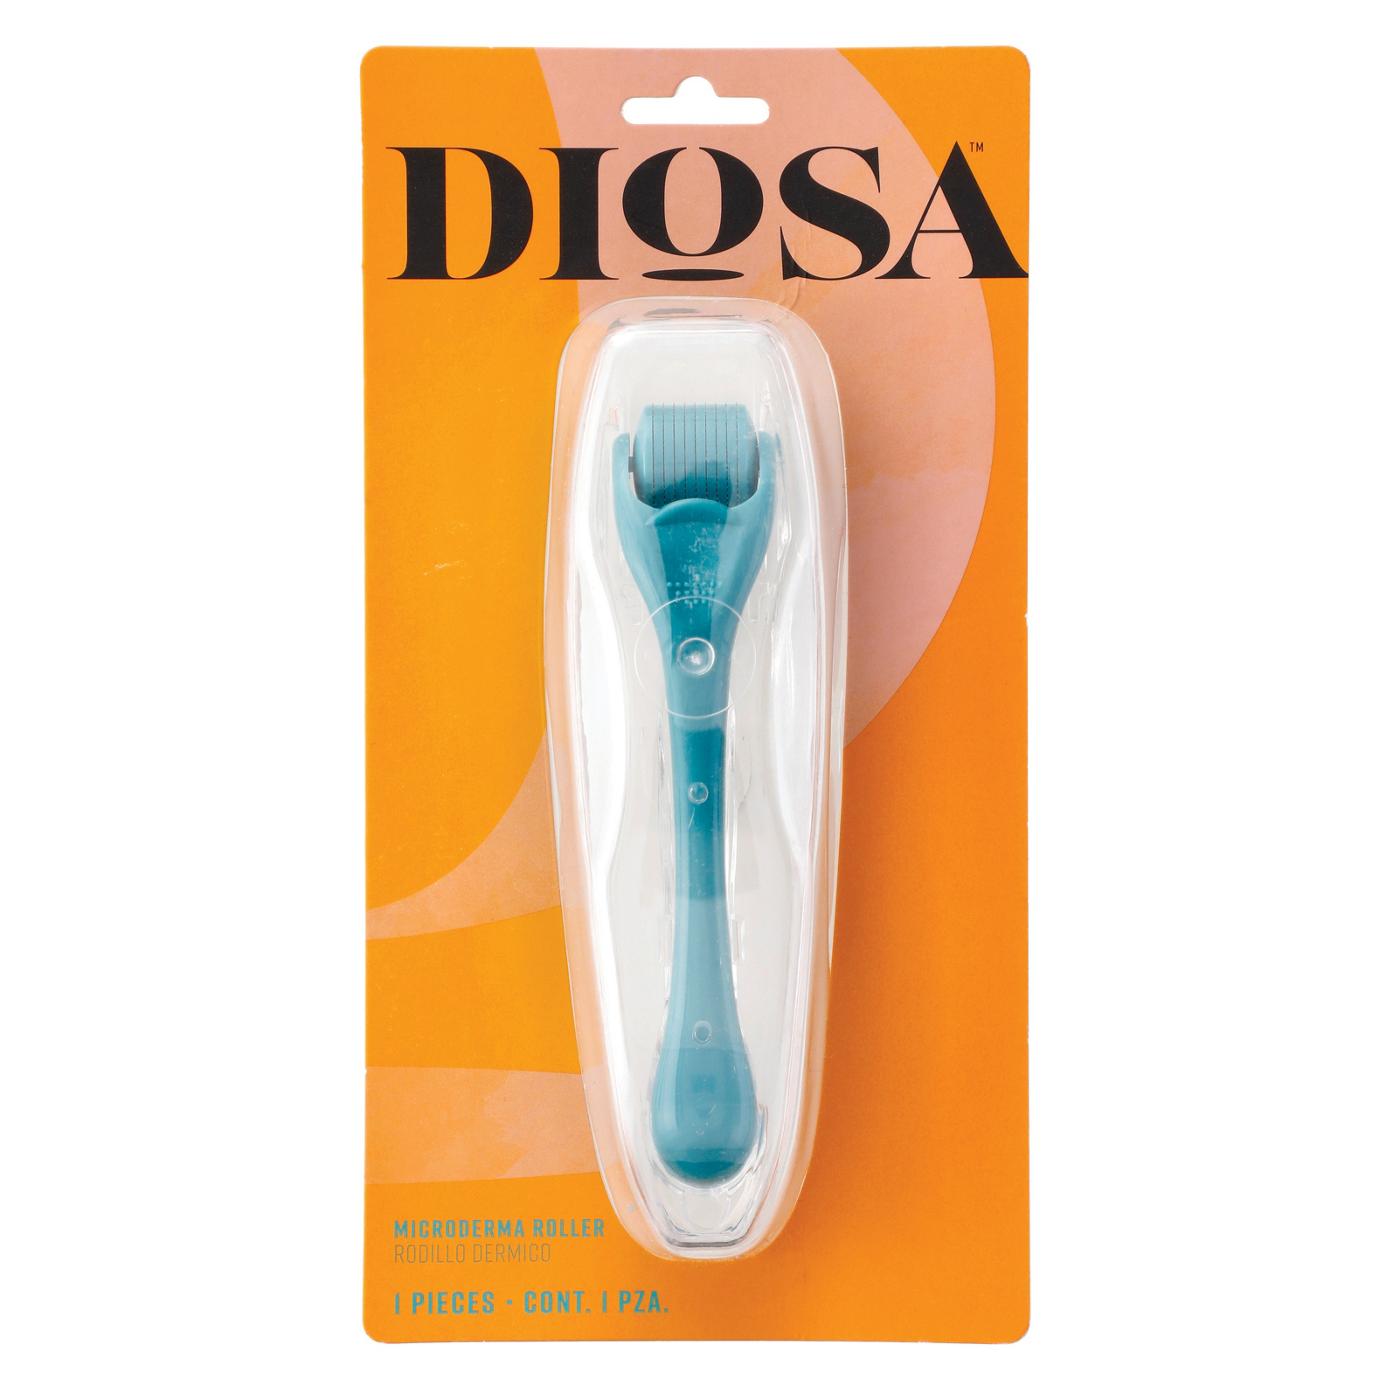 Diosa Microderma Roller; image 1 of 3